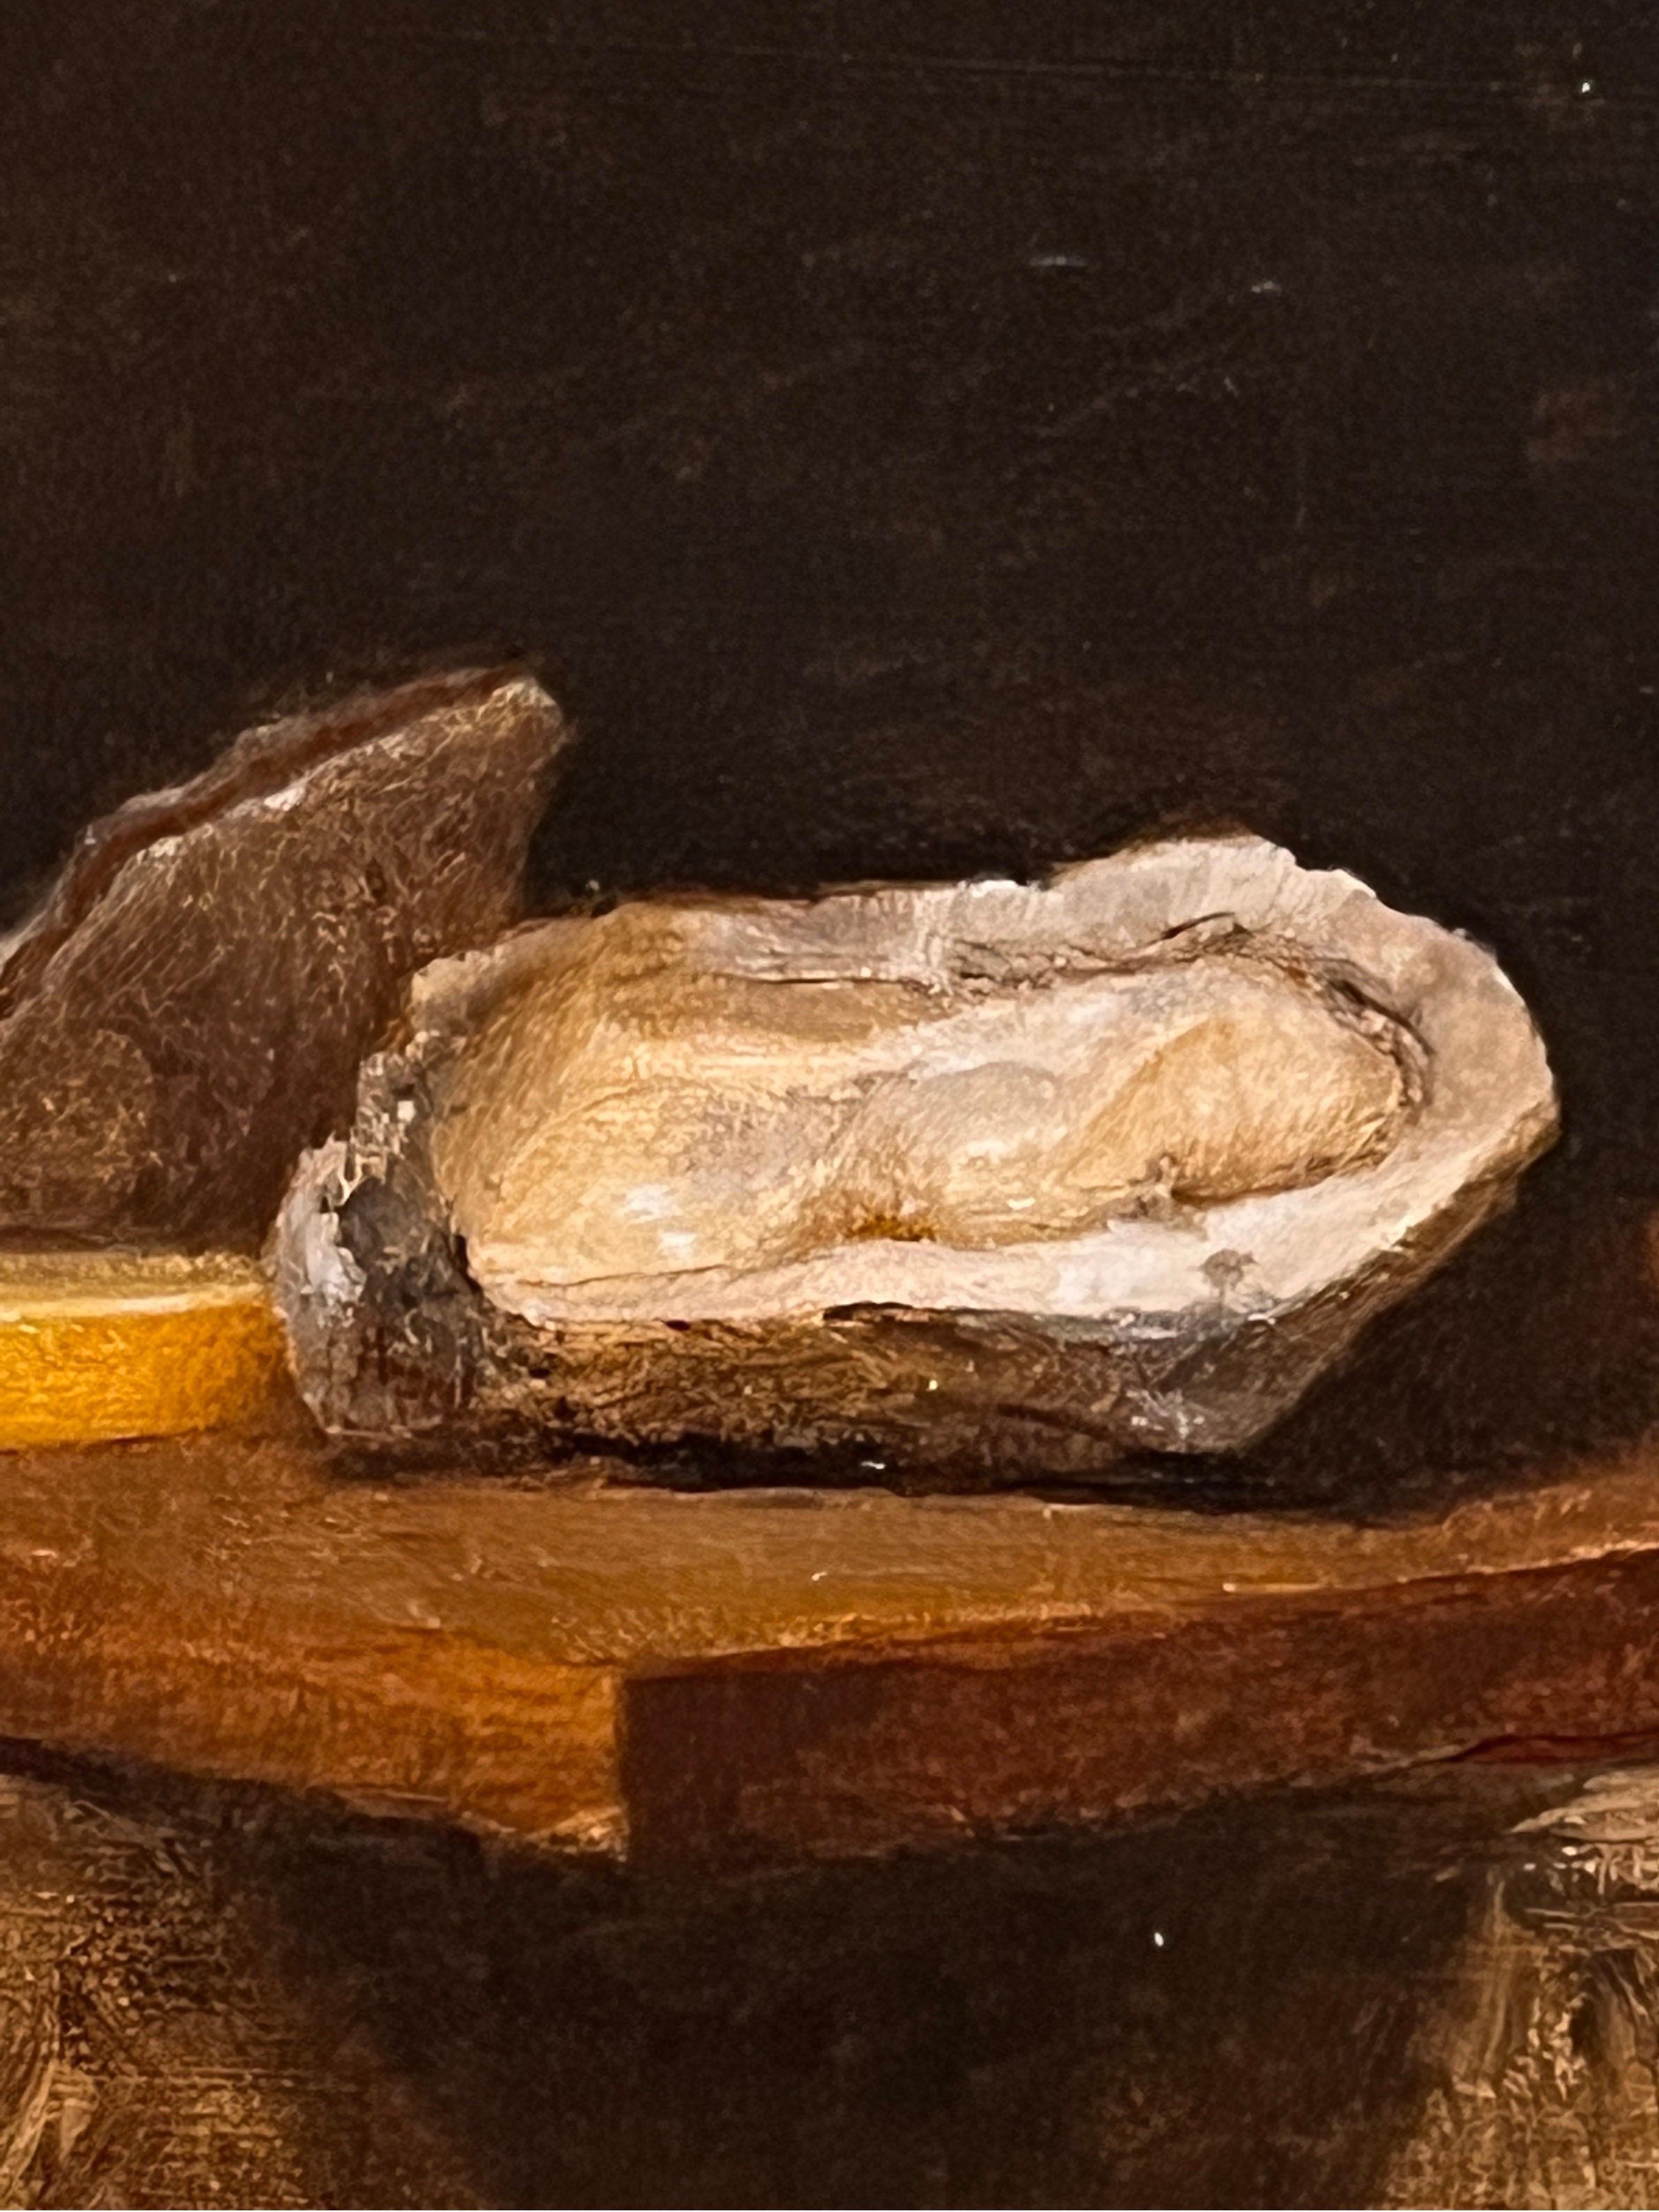 North Fork Oysters - American Realist Painting by Dale Zinkowski